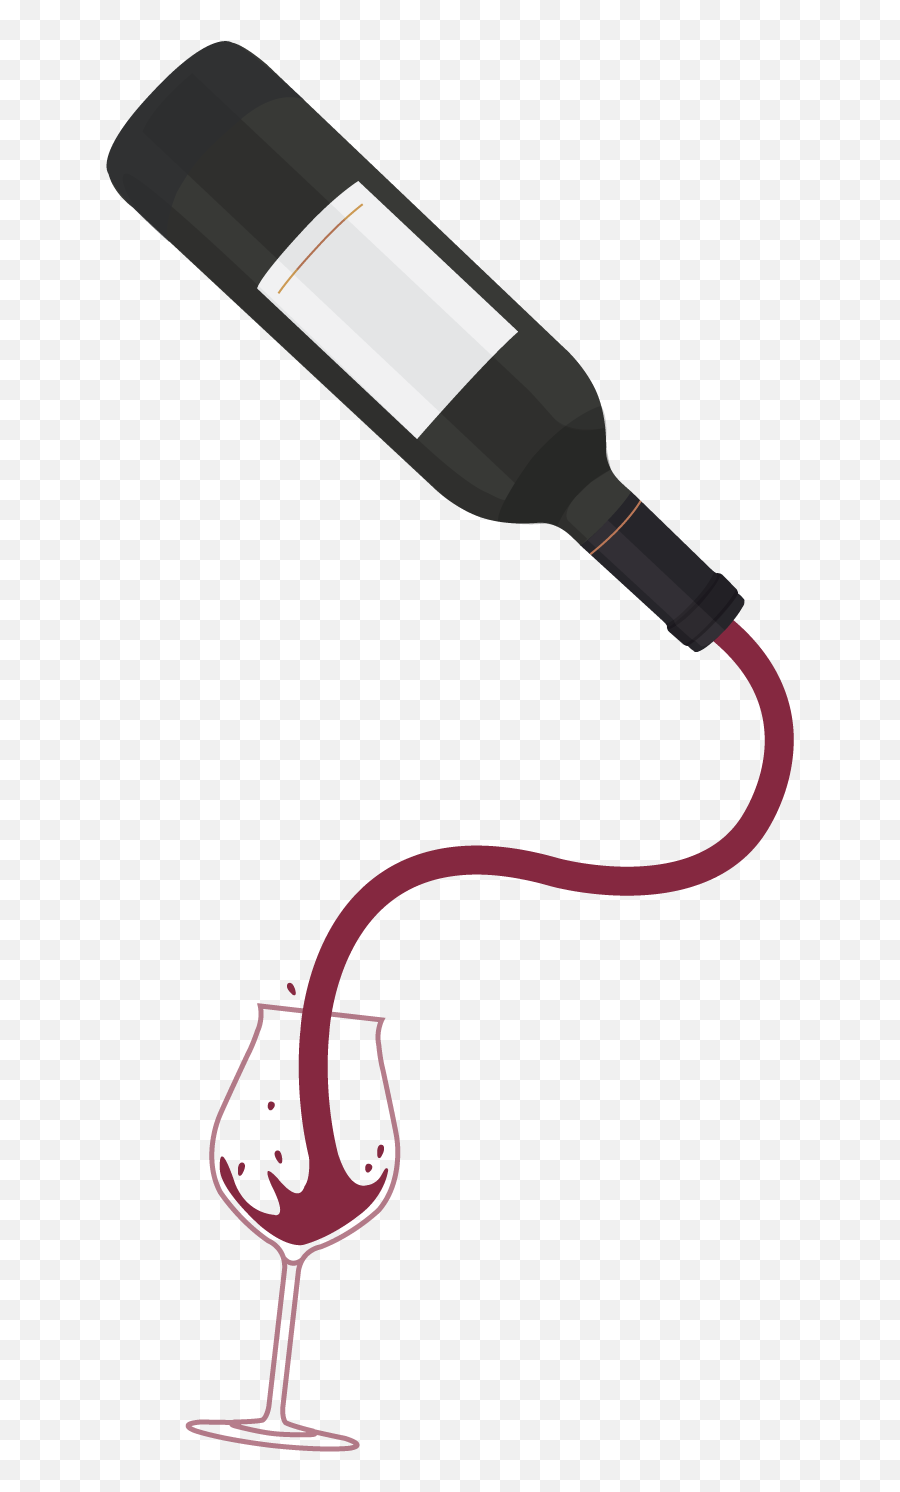 Wine Bottle Pouring Png - Wine Bottle Pouring Clipart,Pouring Png